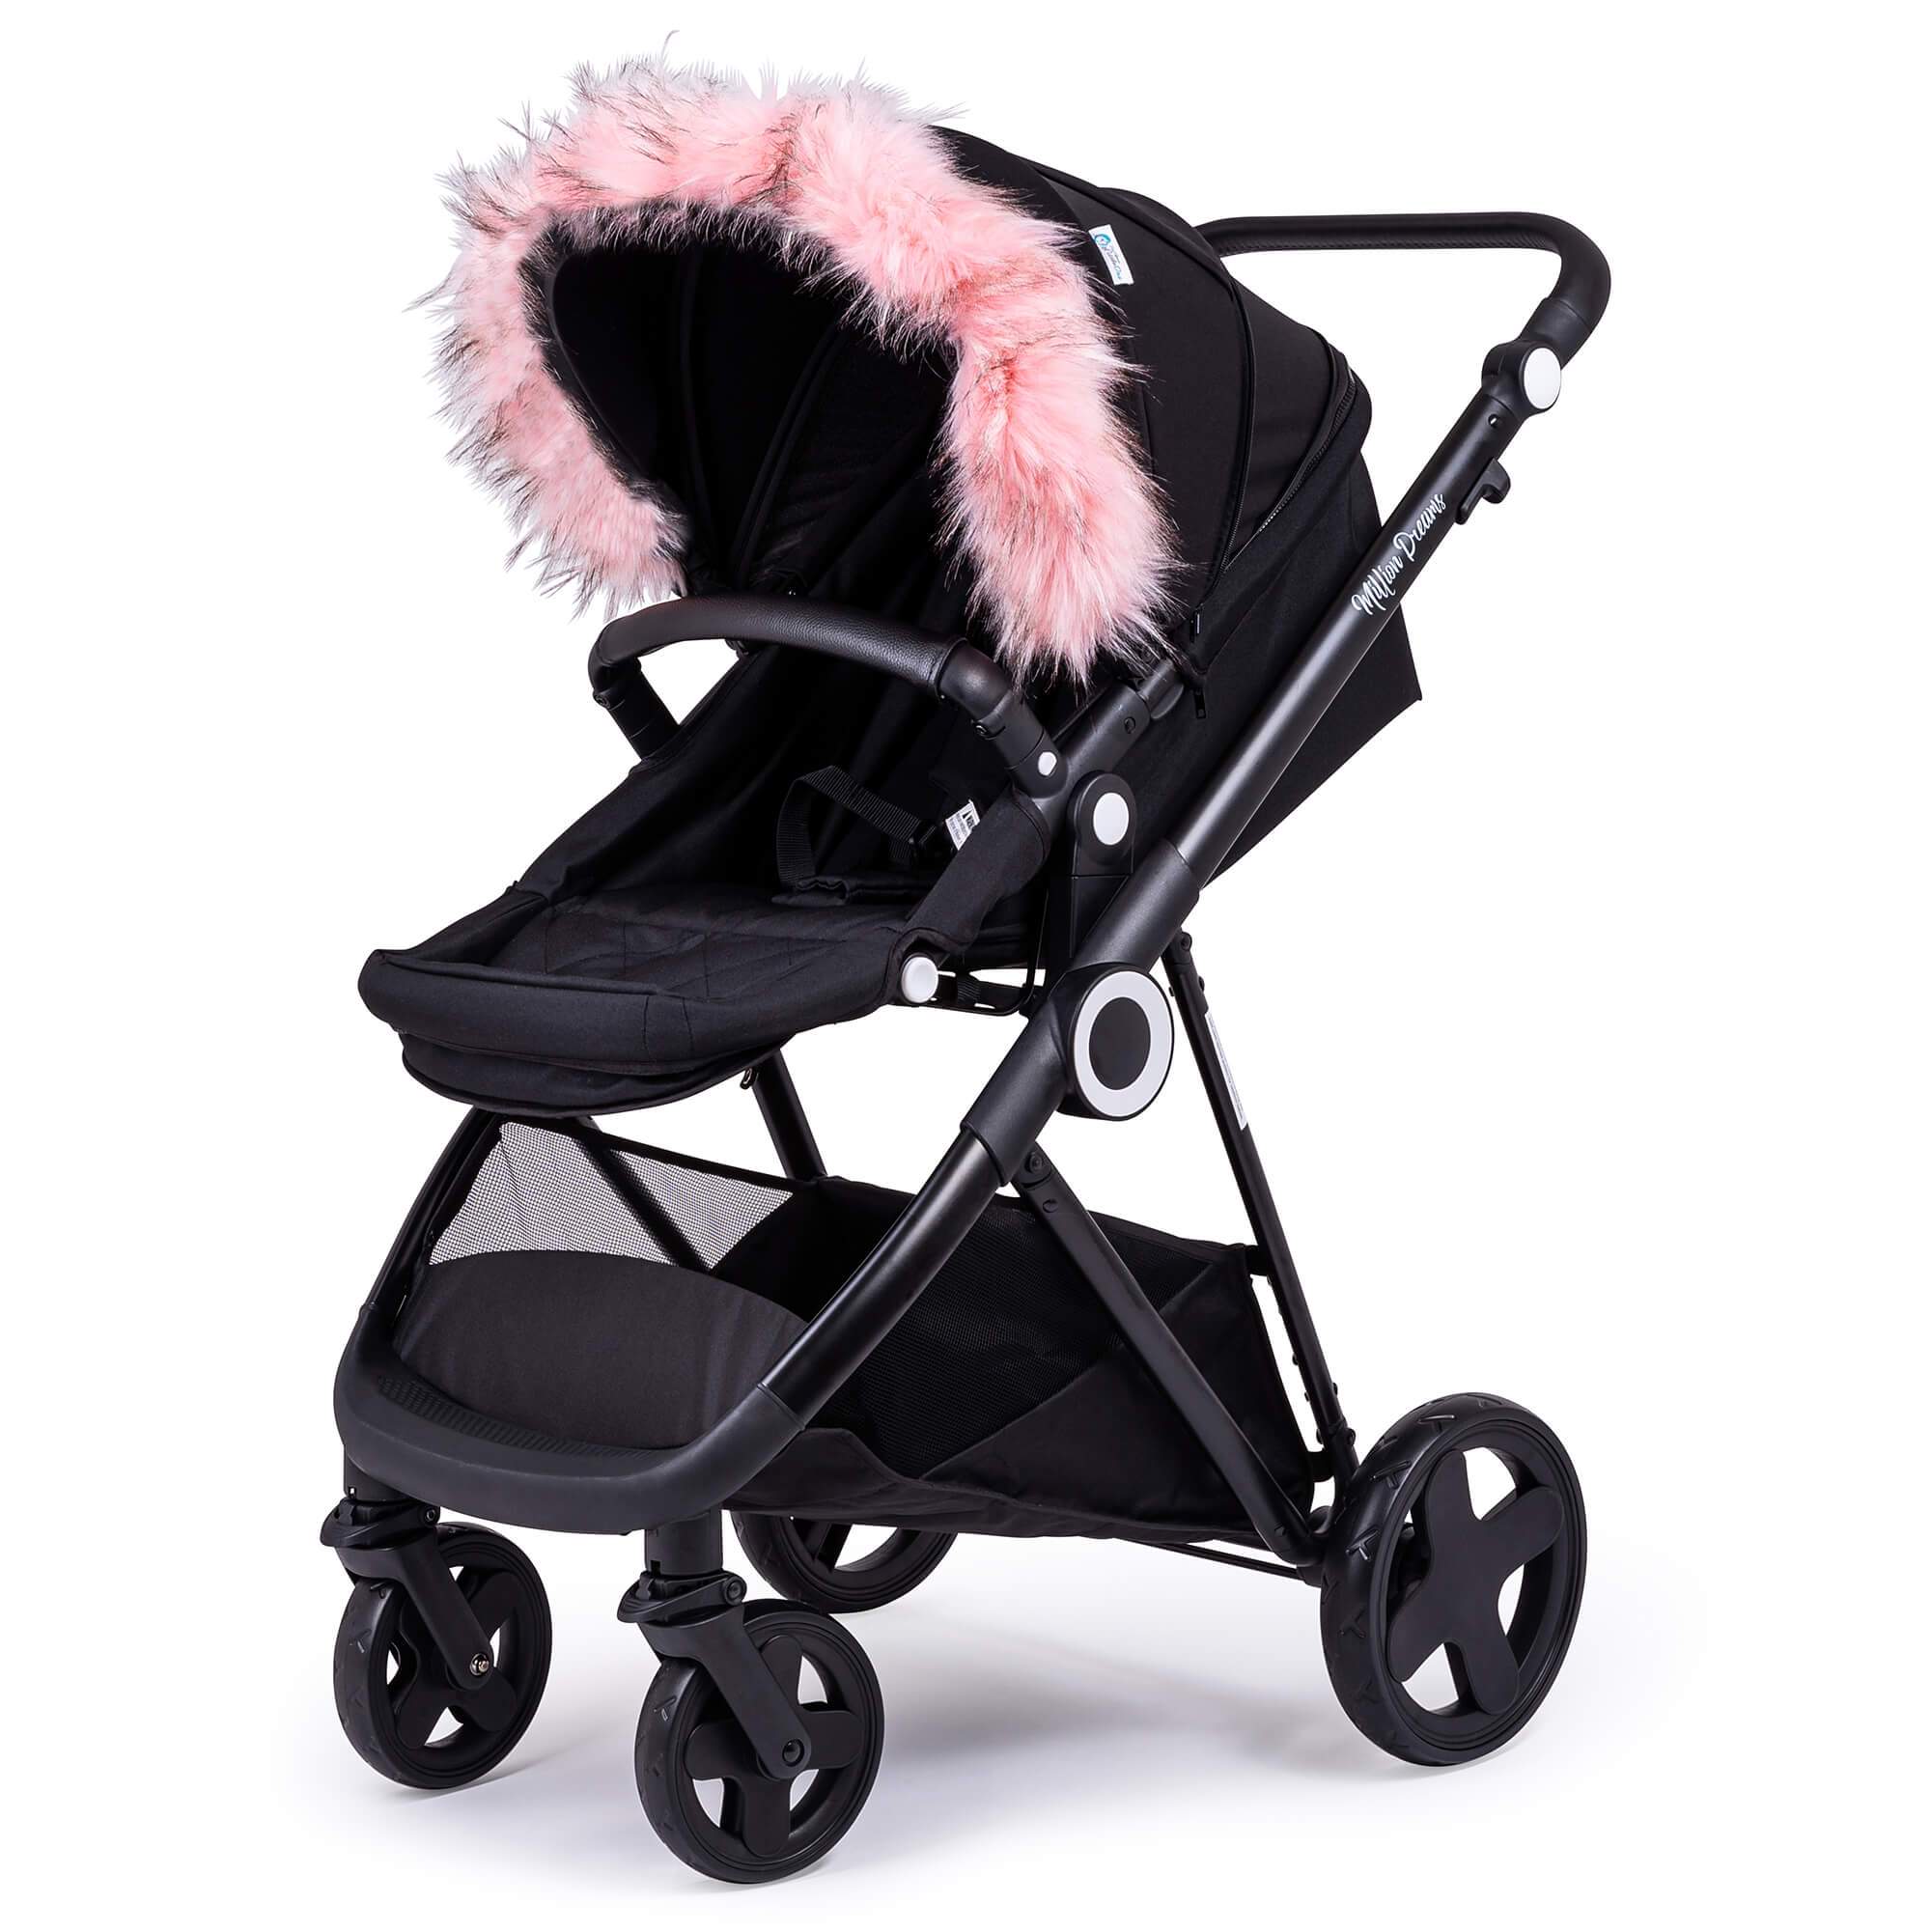 Pram Fur Hood Trim Attachment for Pushchair Compatible with Quax - Light Pink / Fits All Models | For Your Little One